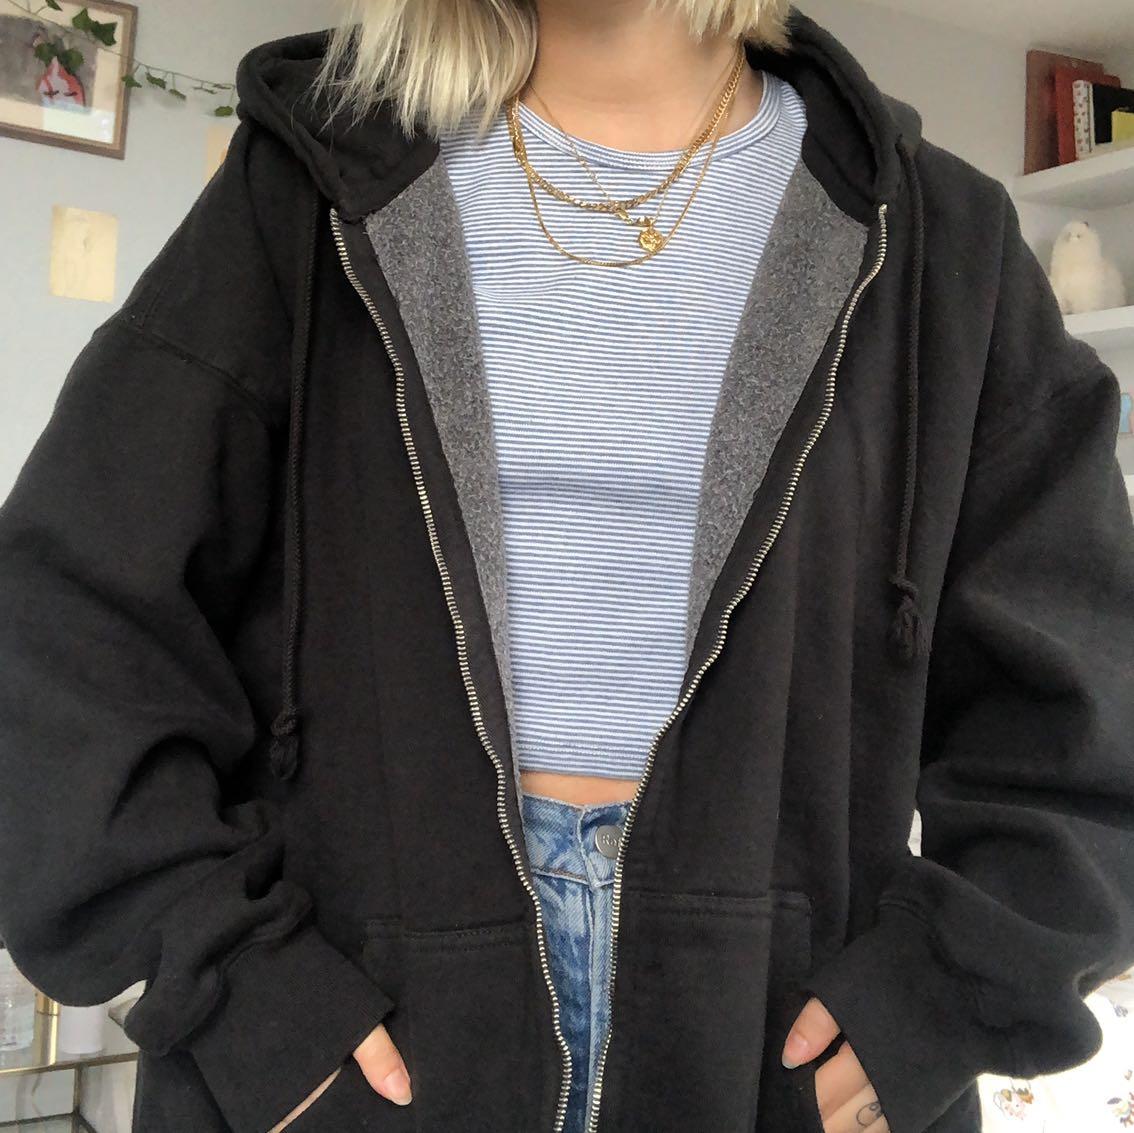 Brandy Melville Christy New York Hoodie, Women's Fashion, Coats, Jackets  and Outerwear on Carousell